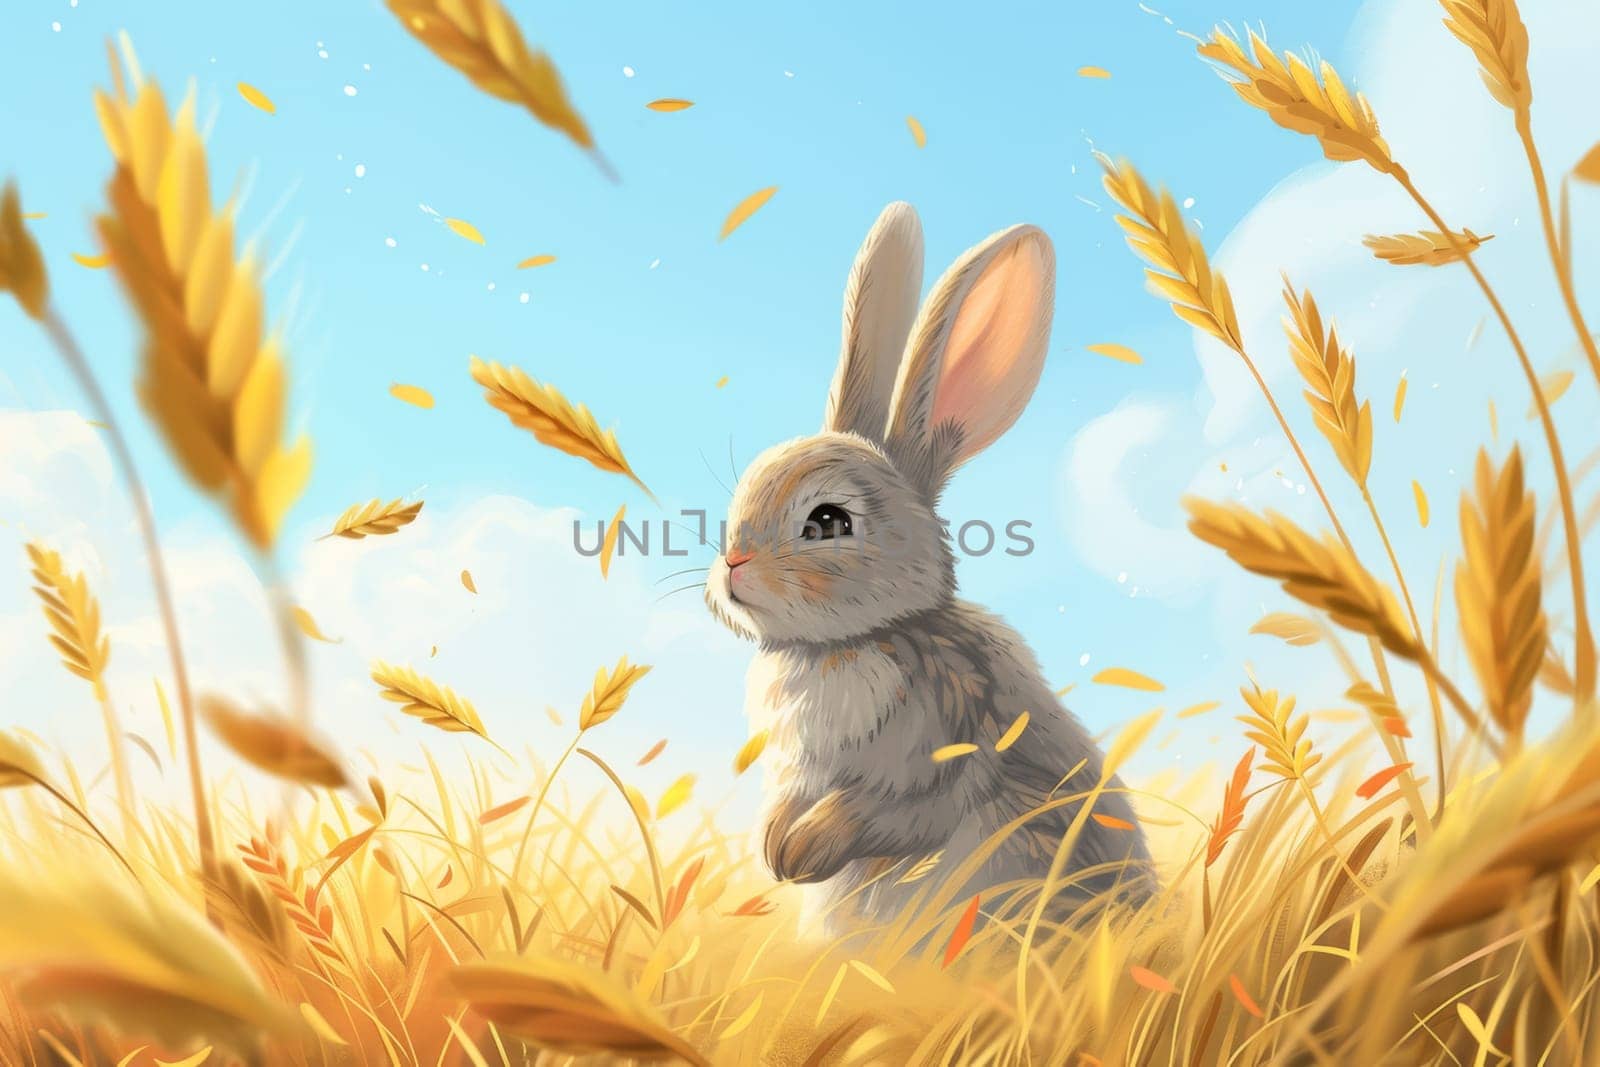 A wild hare in a field with wheat during the day by Lobachad